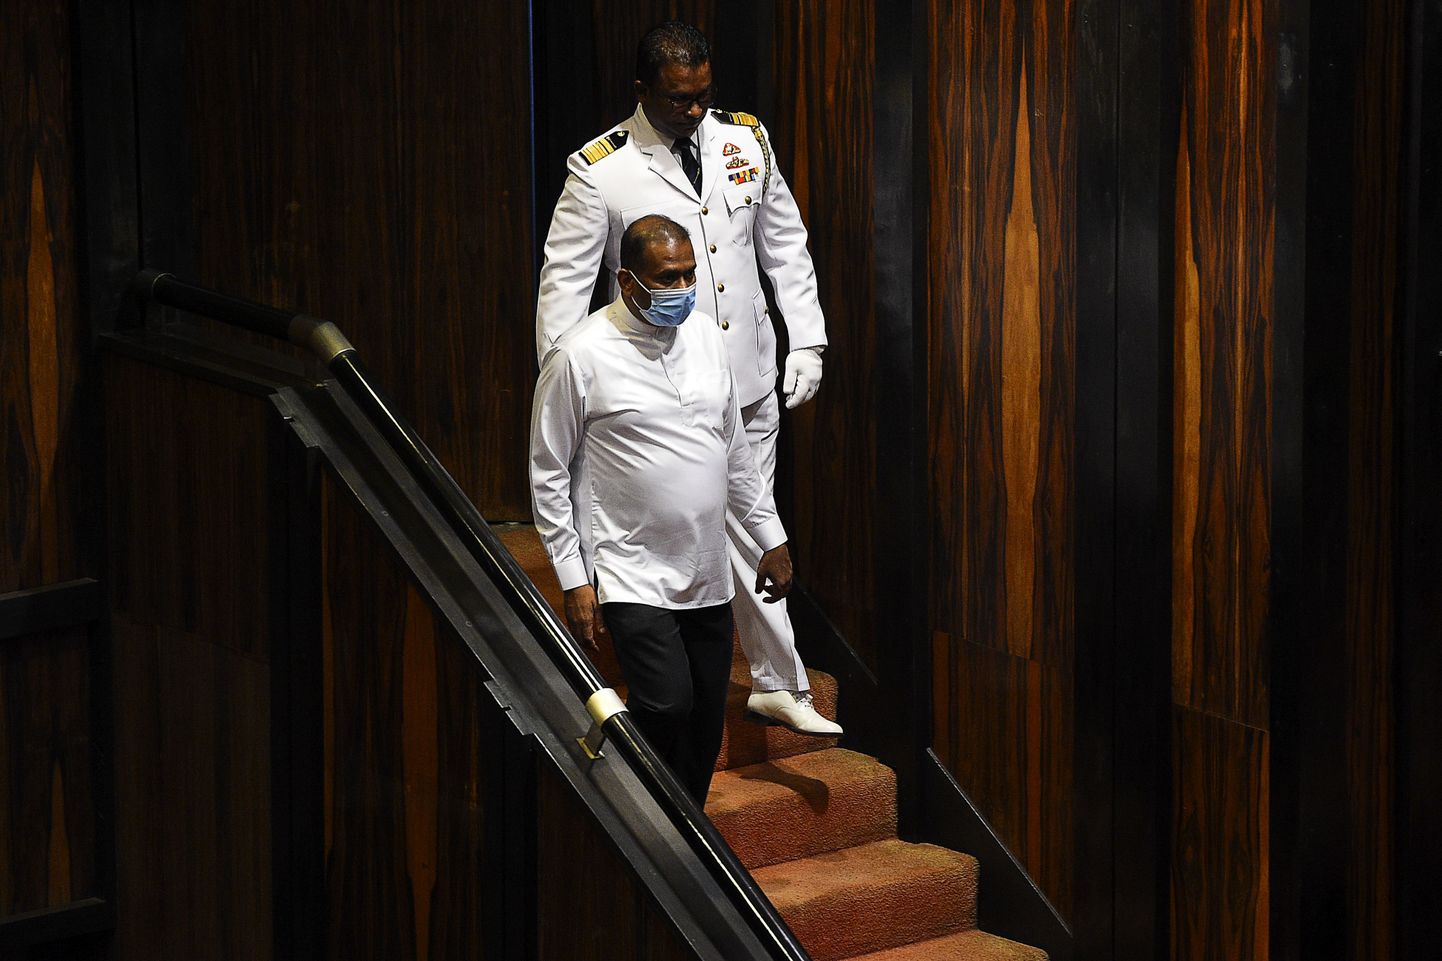 Sri Lanka's convicted murderer Premalal Jayasekara (L) arrives for a sworn in as a member of parliament from the ruling party in Colombo on September 8, 2020. - Jayasekara becomes the first convict facing a death sentence to become a legislator in Sri Lanka. (Photo by ISHARA S. KODIKARA / AFP)